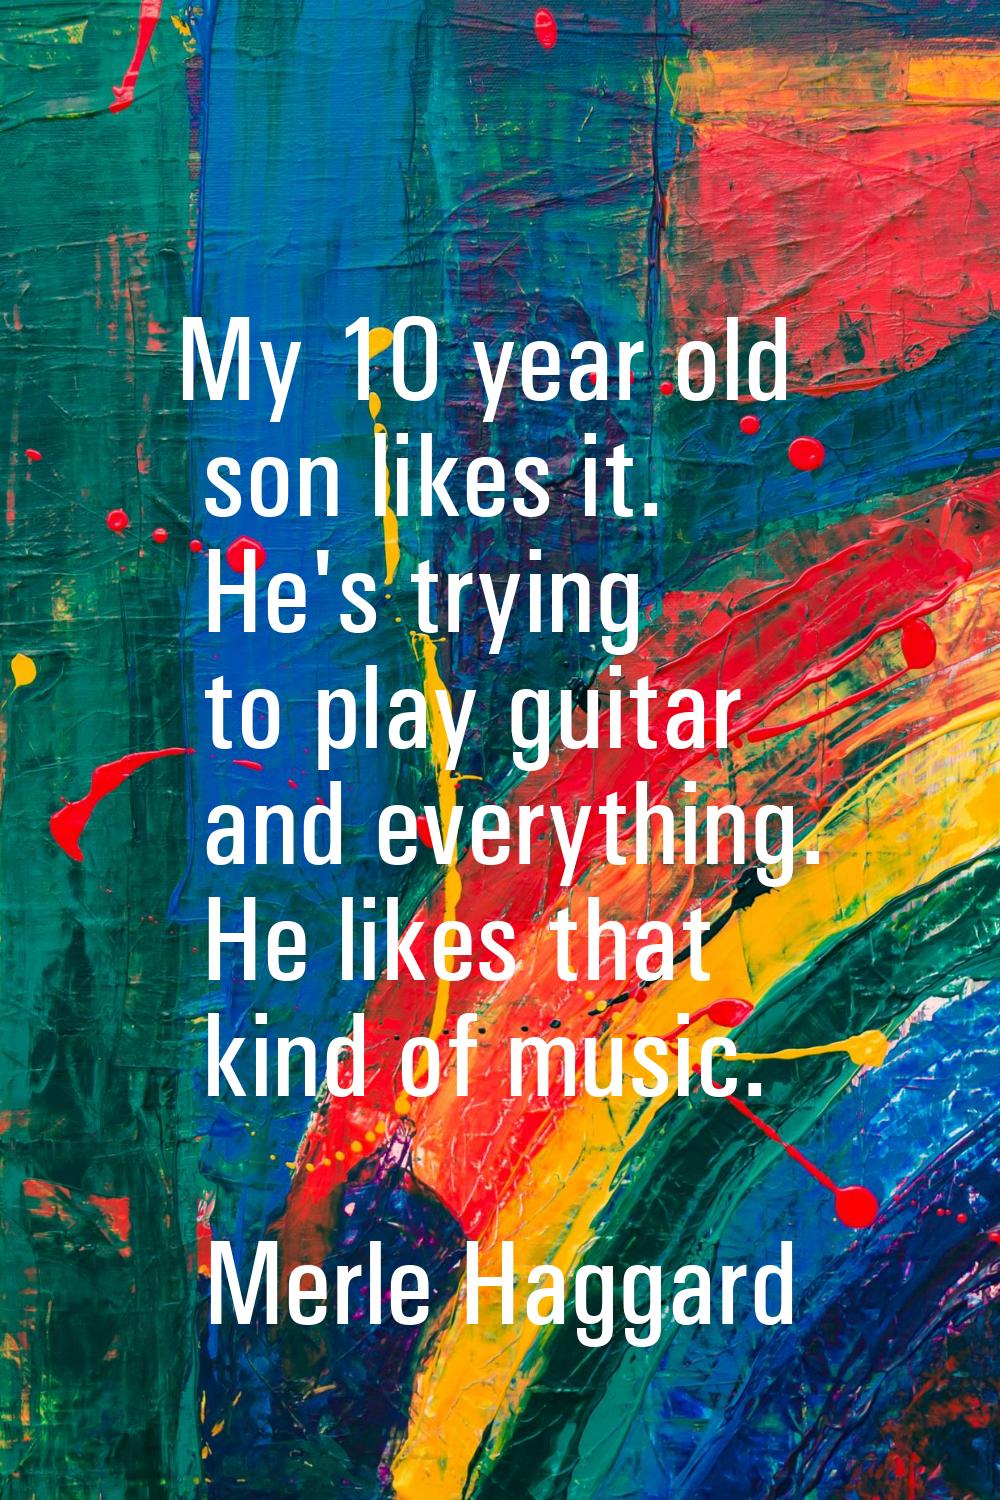 My 10 year old son likes it. He's trying to play guitar and everything. He likes that kind of music